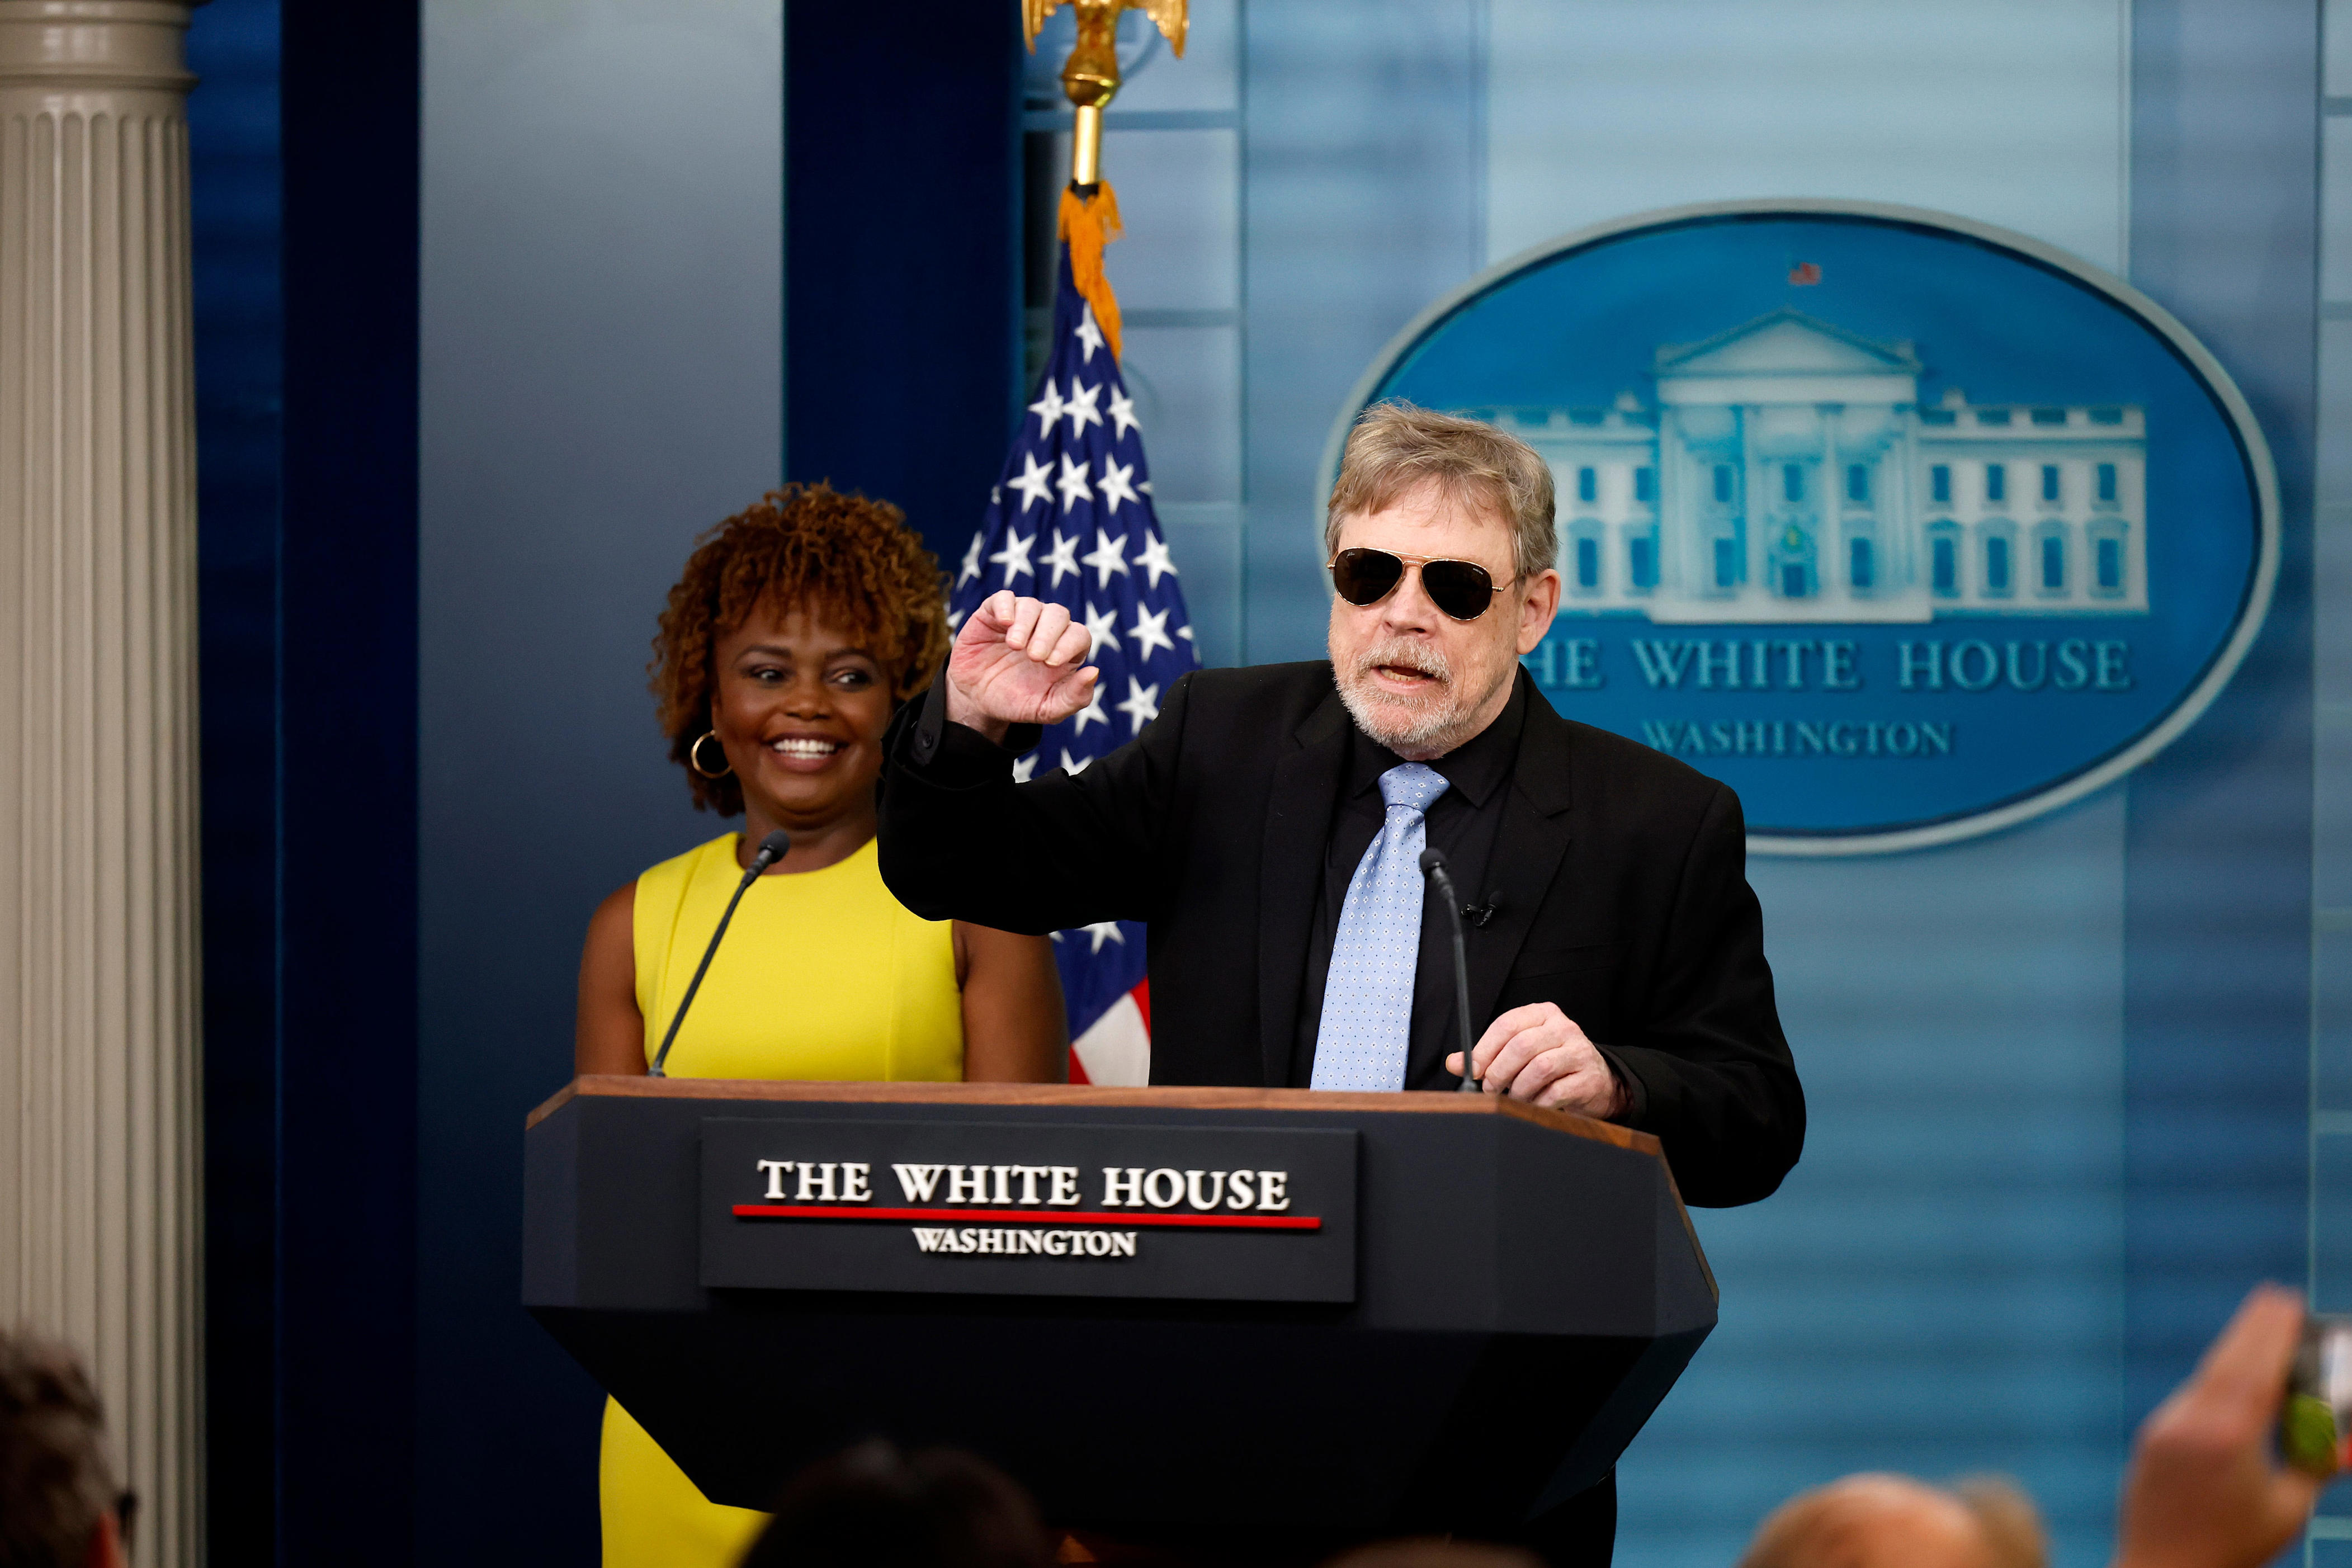 'star wars' actor mark hamill visits white house. he leaves with a pair of biden sunglasses